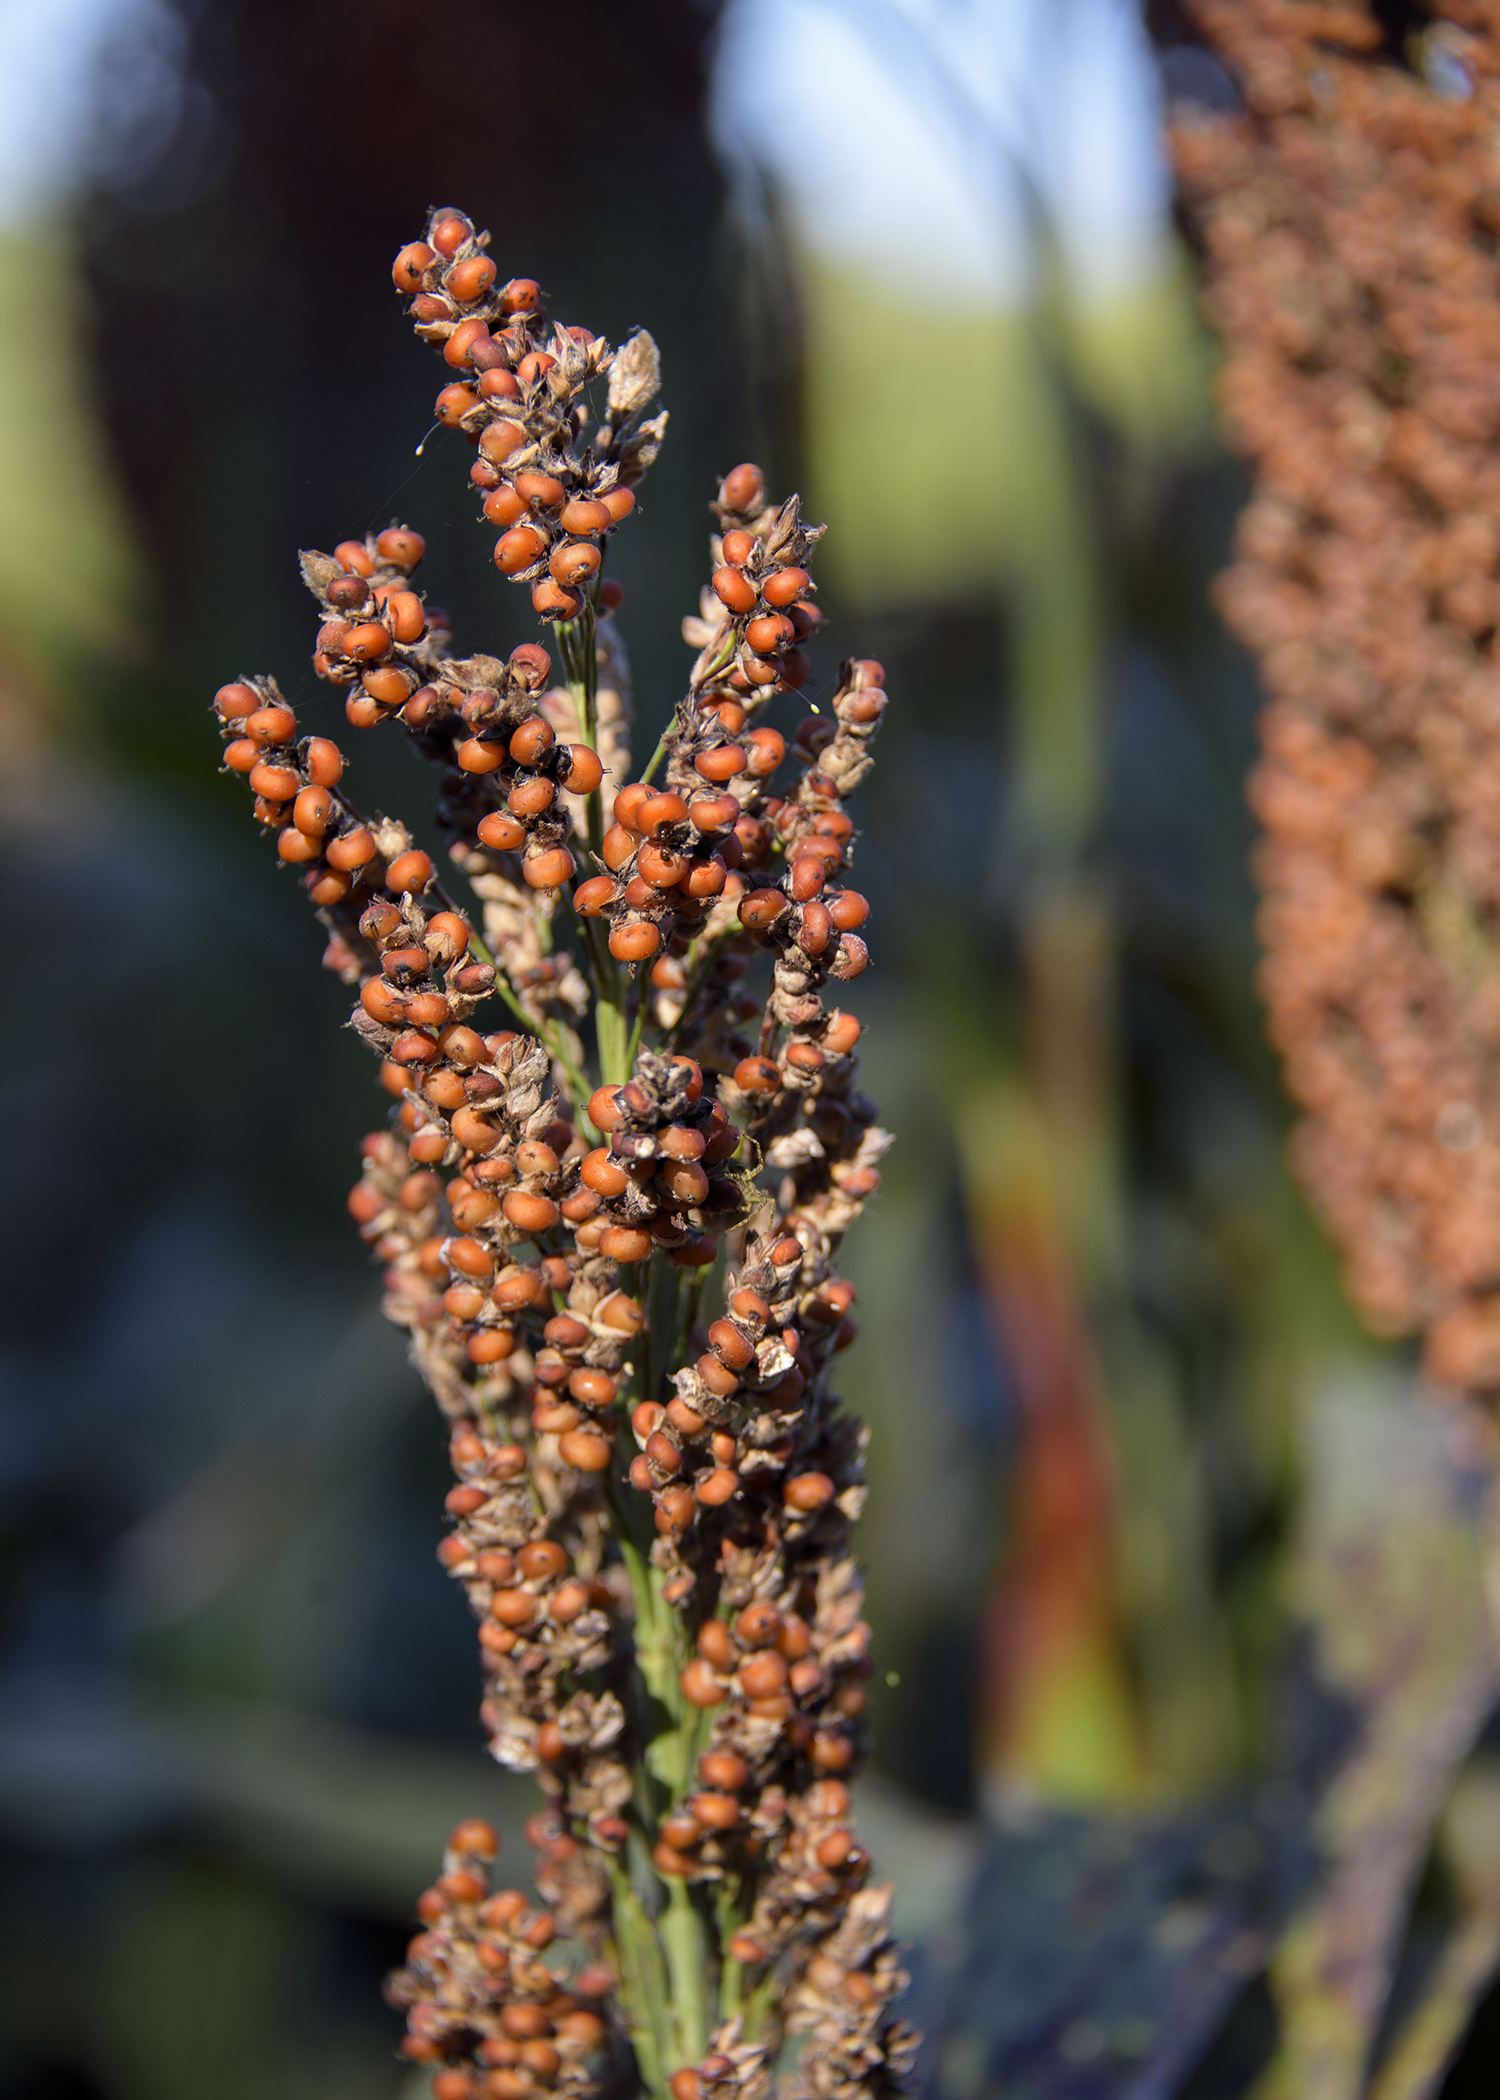 More than half of the state’s grain sorghum had been harvested by mid-September. This sorghum was awaiting harvest Sept. 15, 2016 at Mississippi State University’s R.R. Foil Plant Science Research Center in Starkville, Mississippi. (Photo by MSU Extension Service/Kevin Hudson)